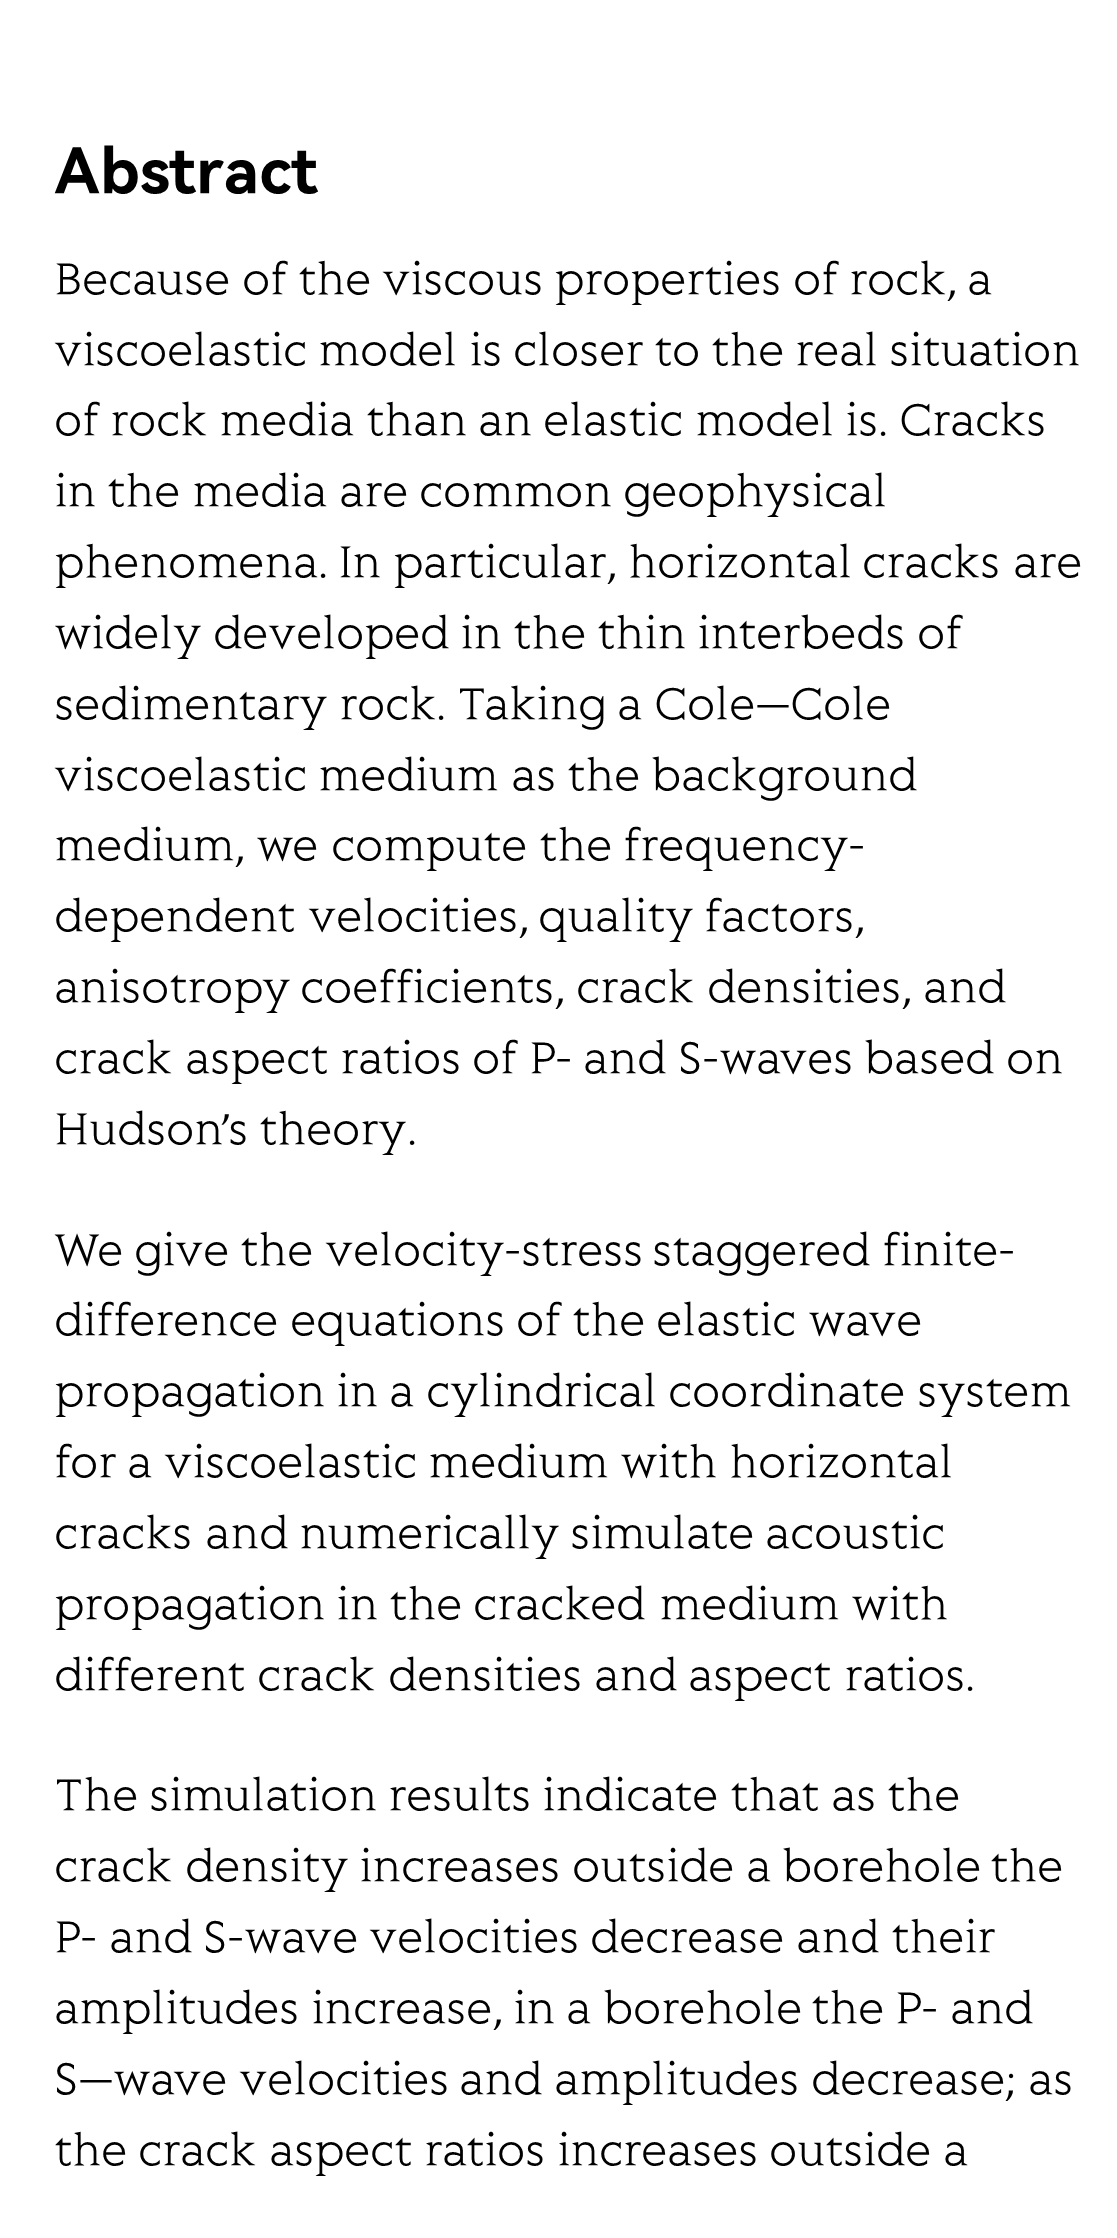 Propagation characteristics of acoustic waves in a borehole surrounded by a viscoelastic medium with horizontal cracks_2